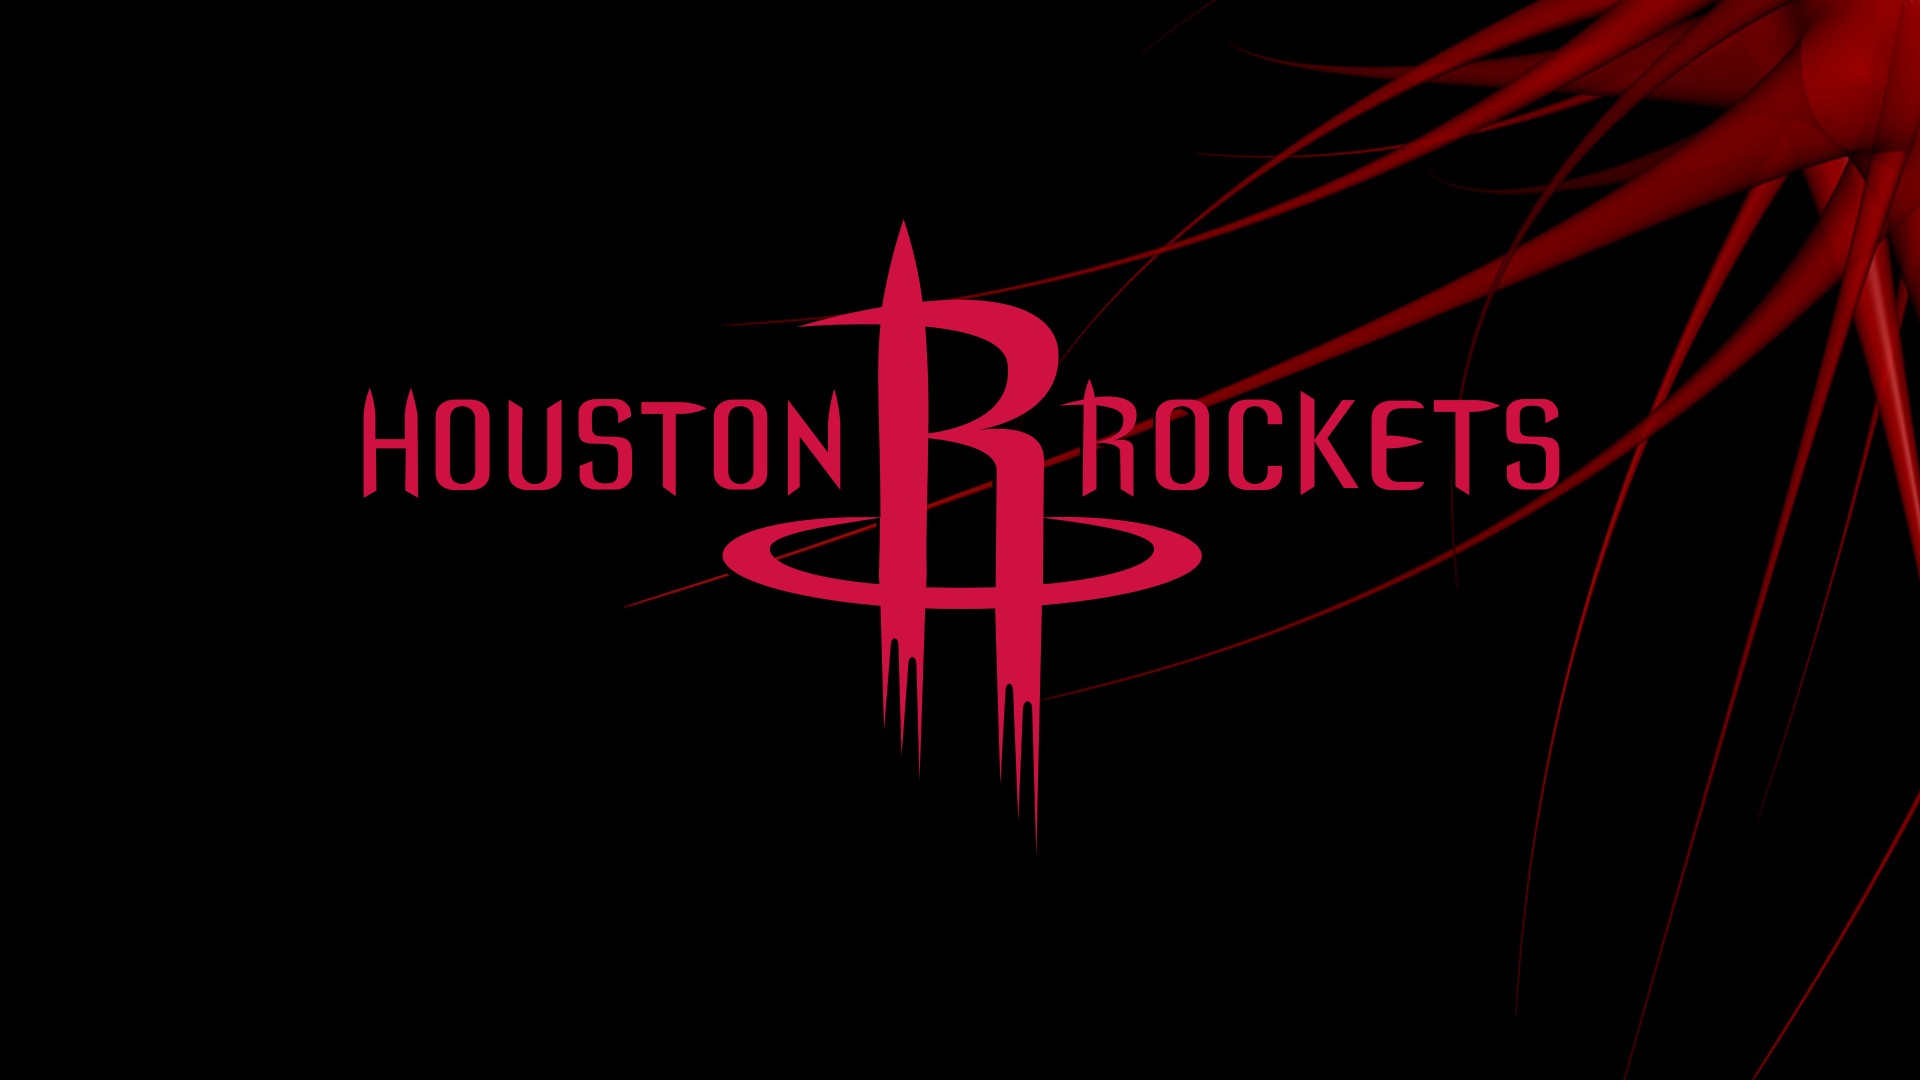 Rockets Backgrounds HD with image dimensions 1920x1080 pixel. You can make this wallpaper for your Desktop Computer Backgrounds, Windows or Mac Screensavers, iPhone Lock screen, Tablet or Android and another Mobile Phone device